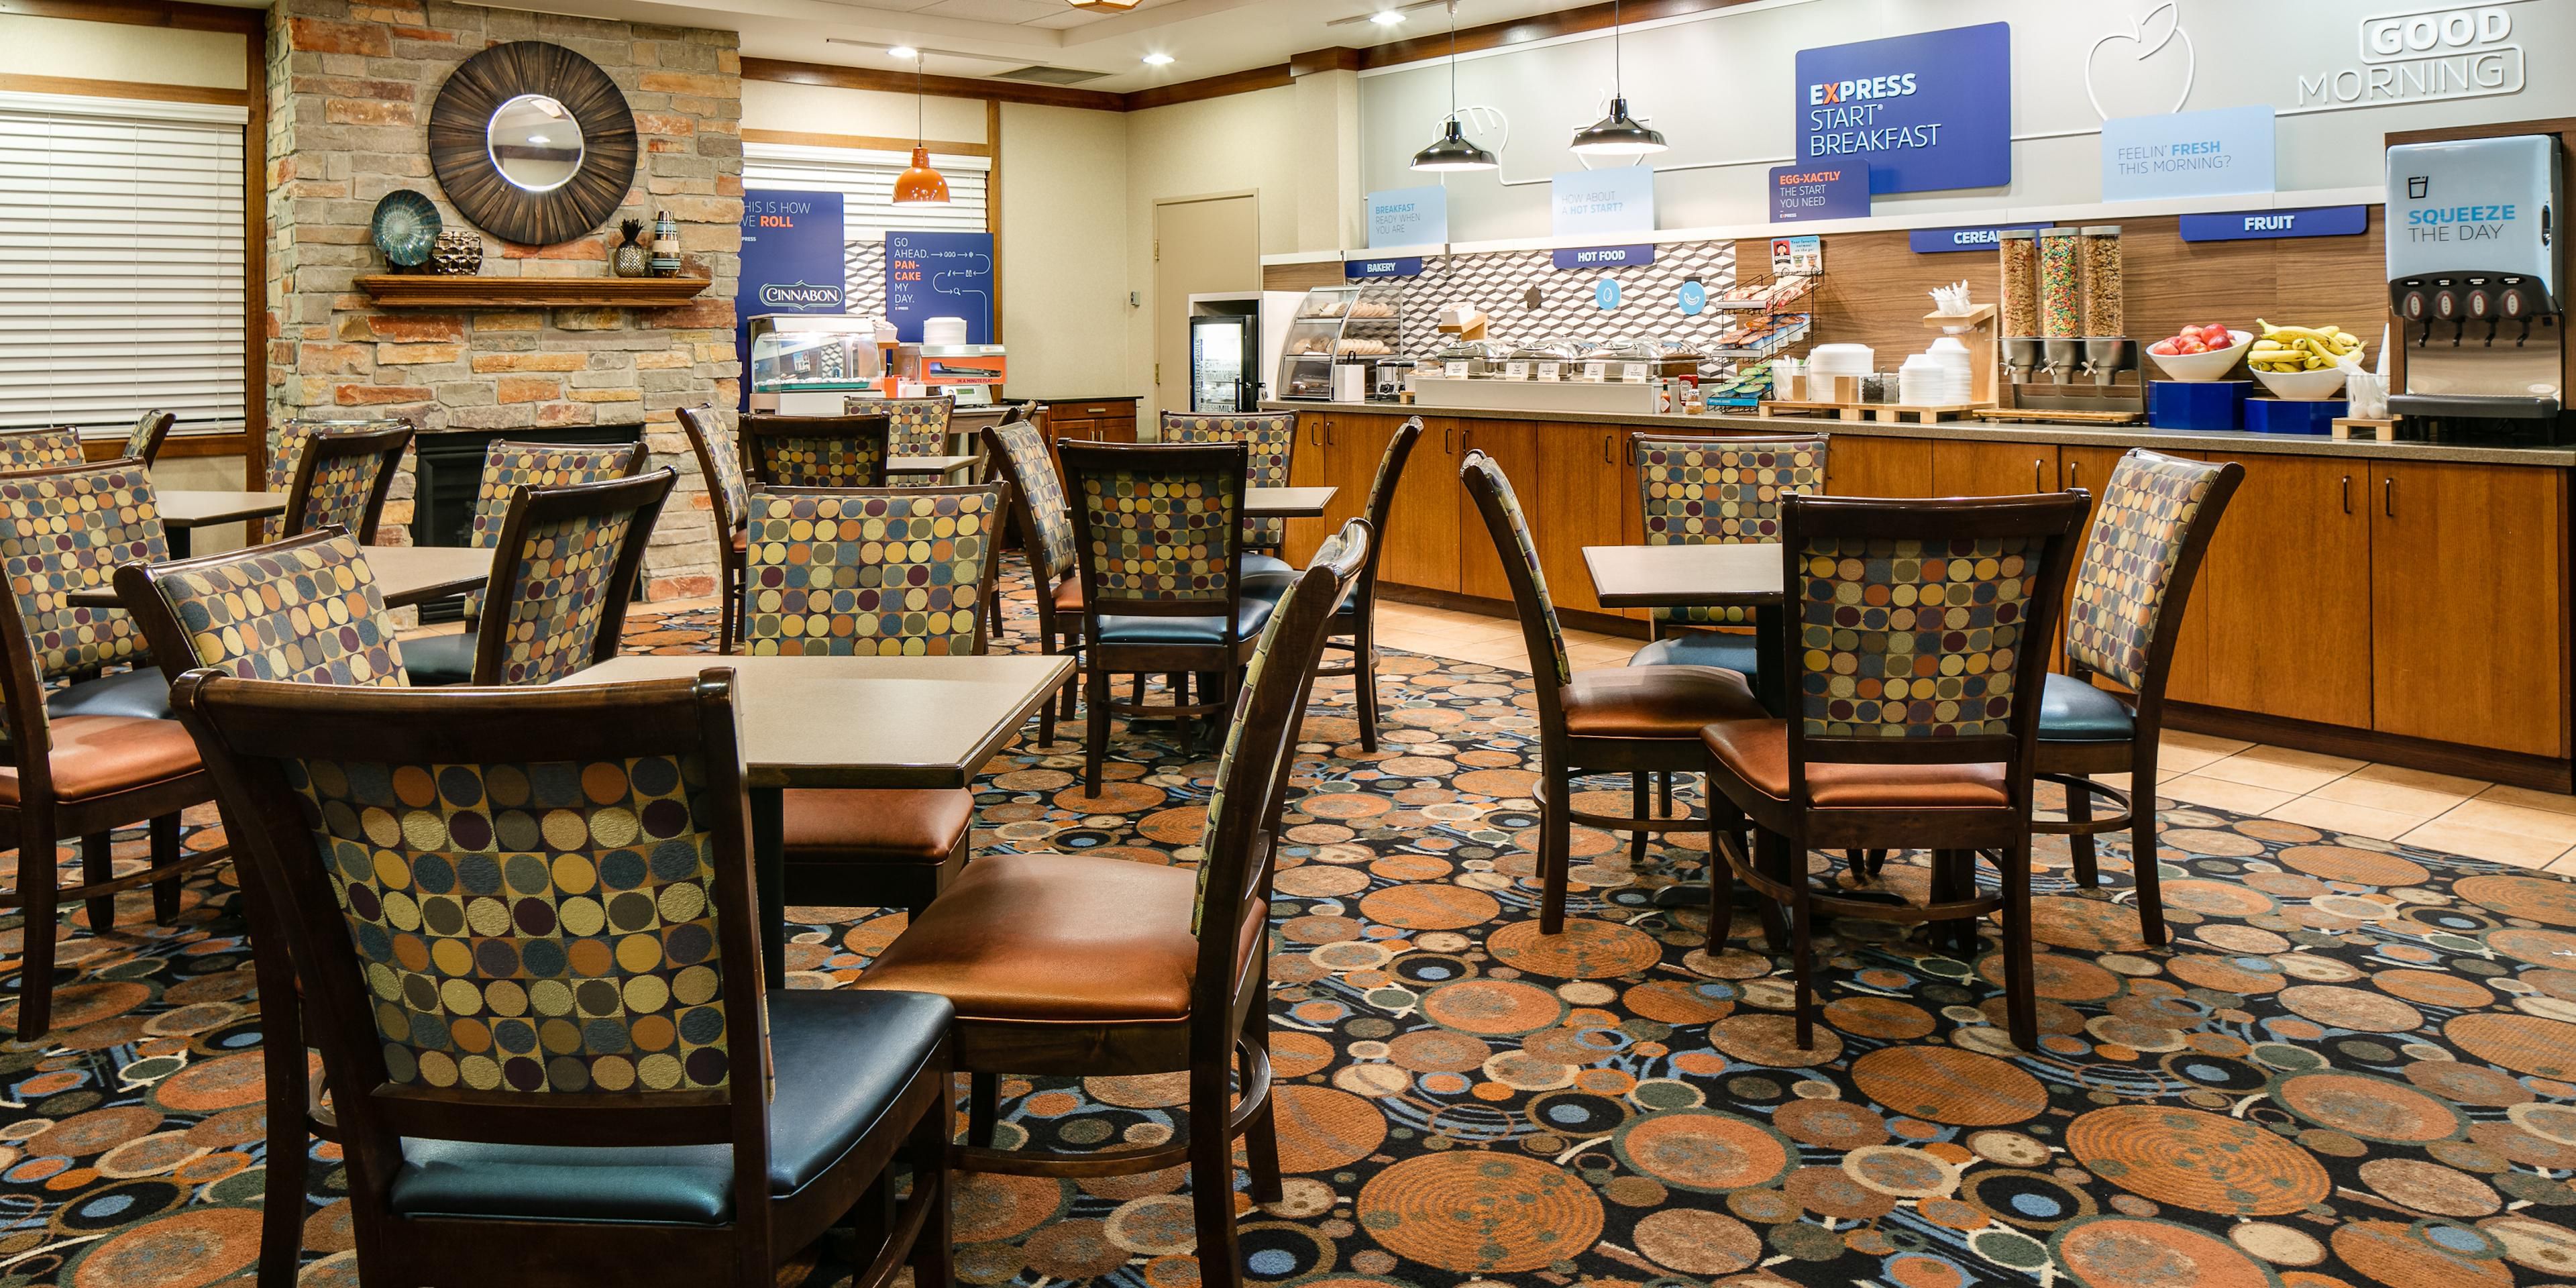 You can be sure to start your morning right with our attendant-served hot breakfast in our lobby. Our hotel features a complimentary "Express Start" hot breakfast buffet that includes eggs, sausage or bacon, fresh-made pancakes , cinnamon rolls, and piping hot coffee.